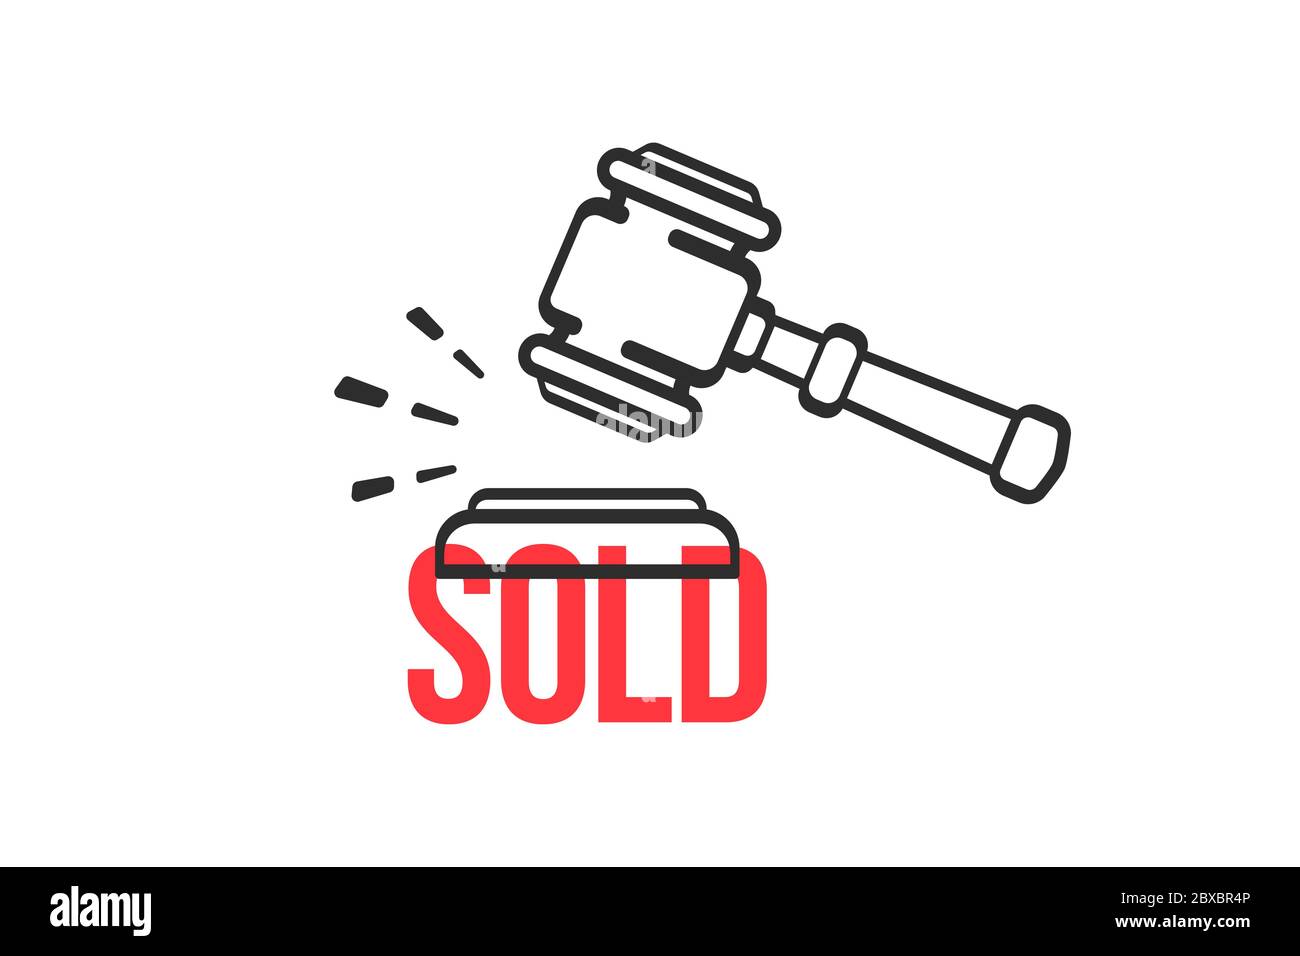 Auction vector symbol. Gavel making sound sold. Sold, hammer, auction concept. Stock Vector